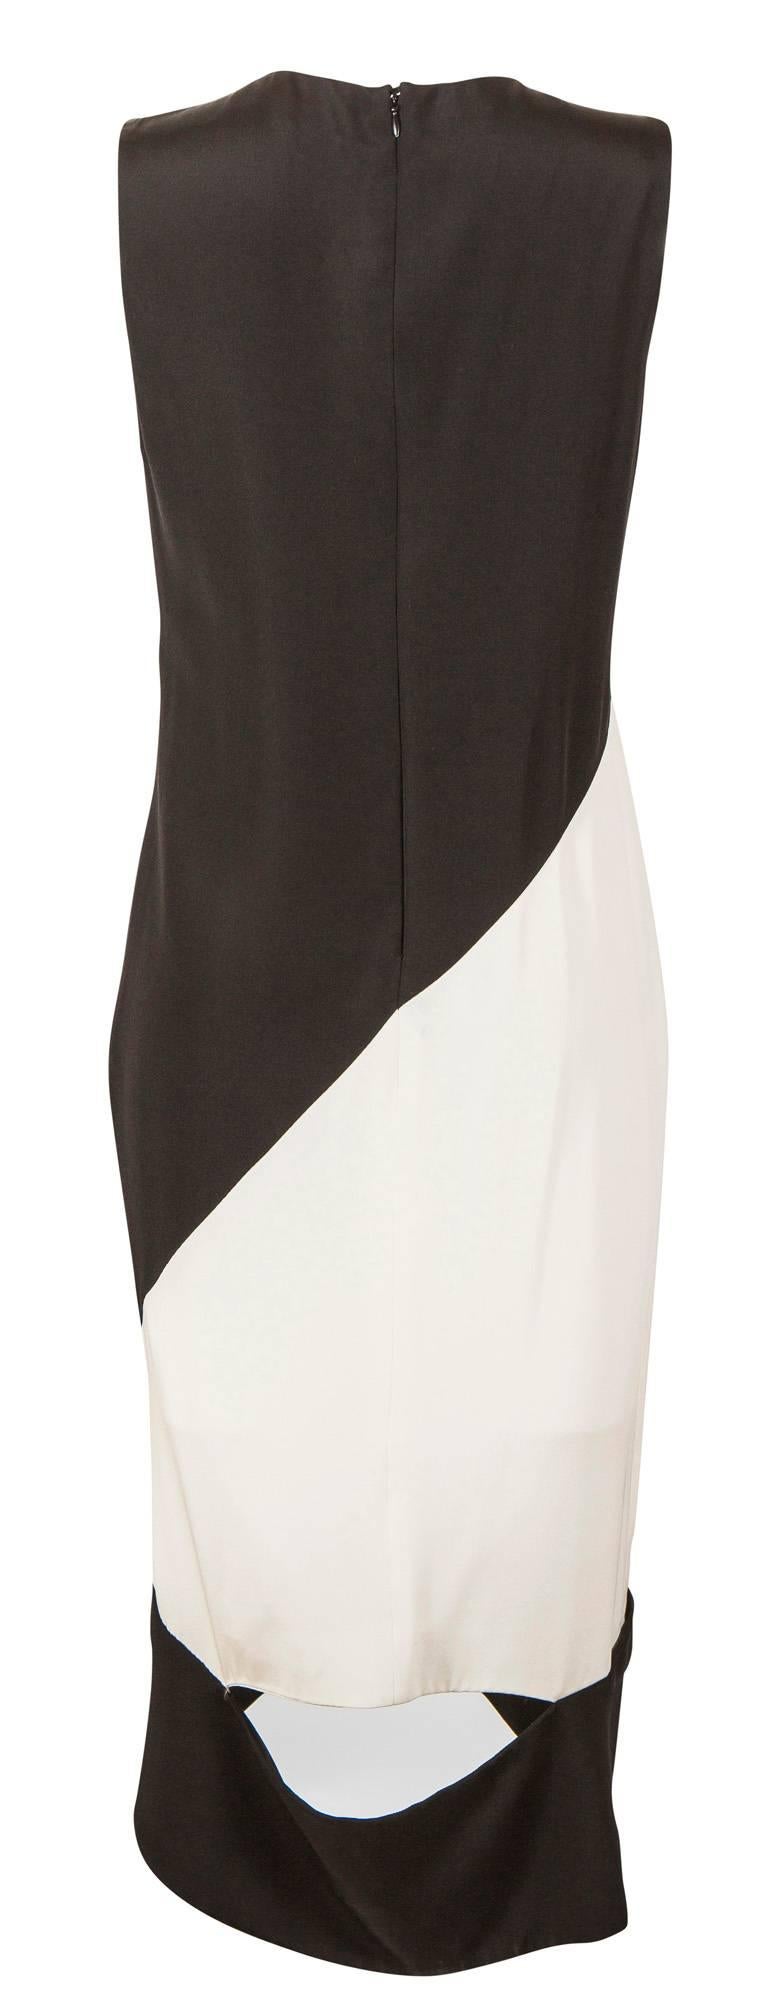 Label: Tom Ford
Collection: Spring/Summer 2013
Designer: Tom Ford
Description: Black and White silk geometric panel evening dress with sheer panel at front, and split detail at the back of the dress. 
Size: Italian 40